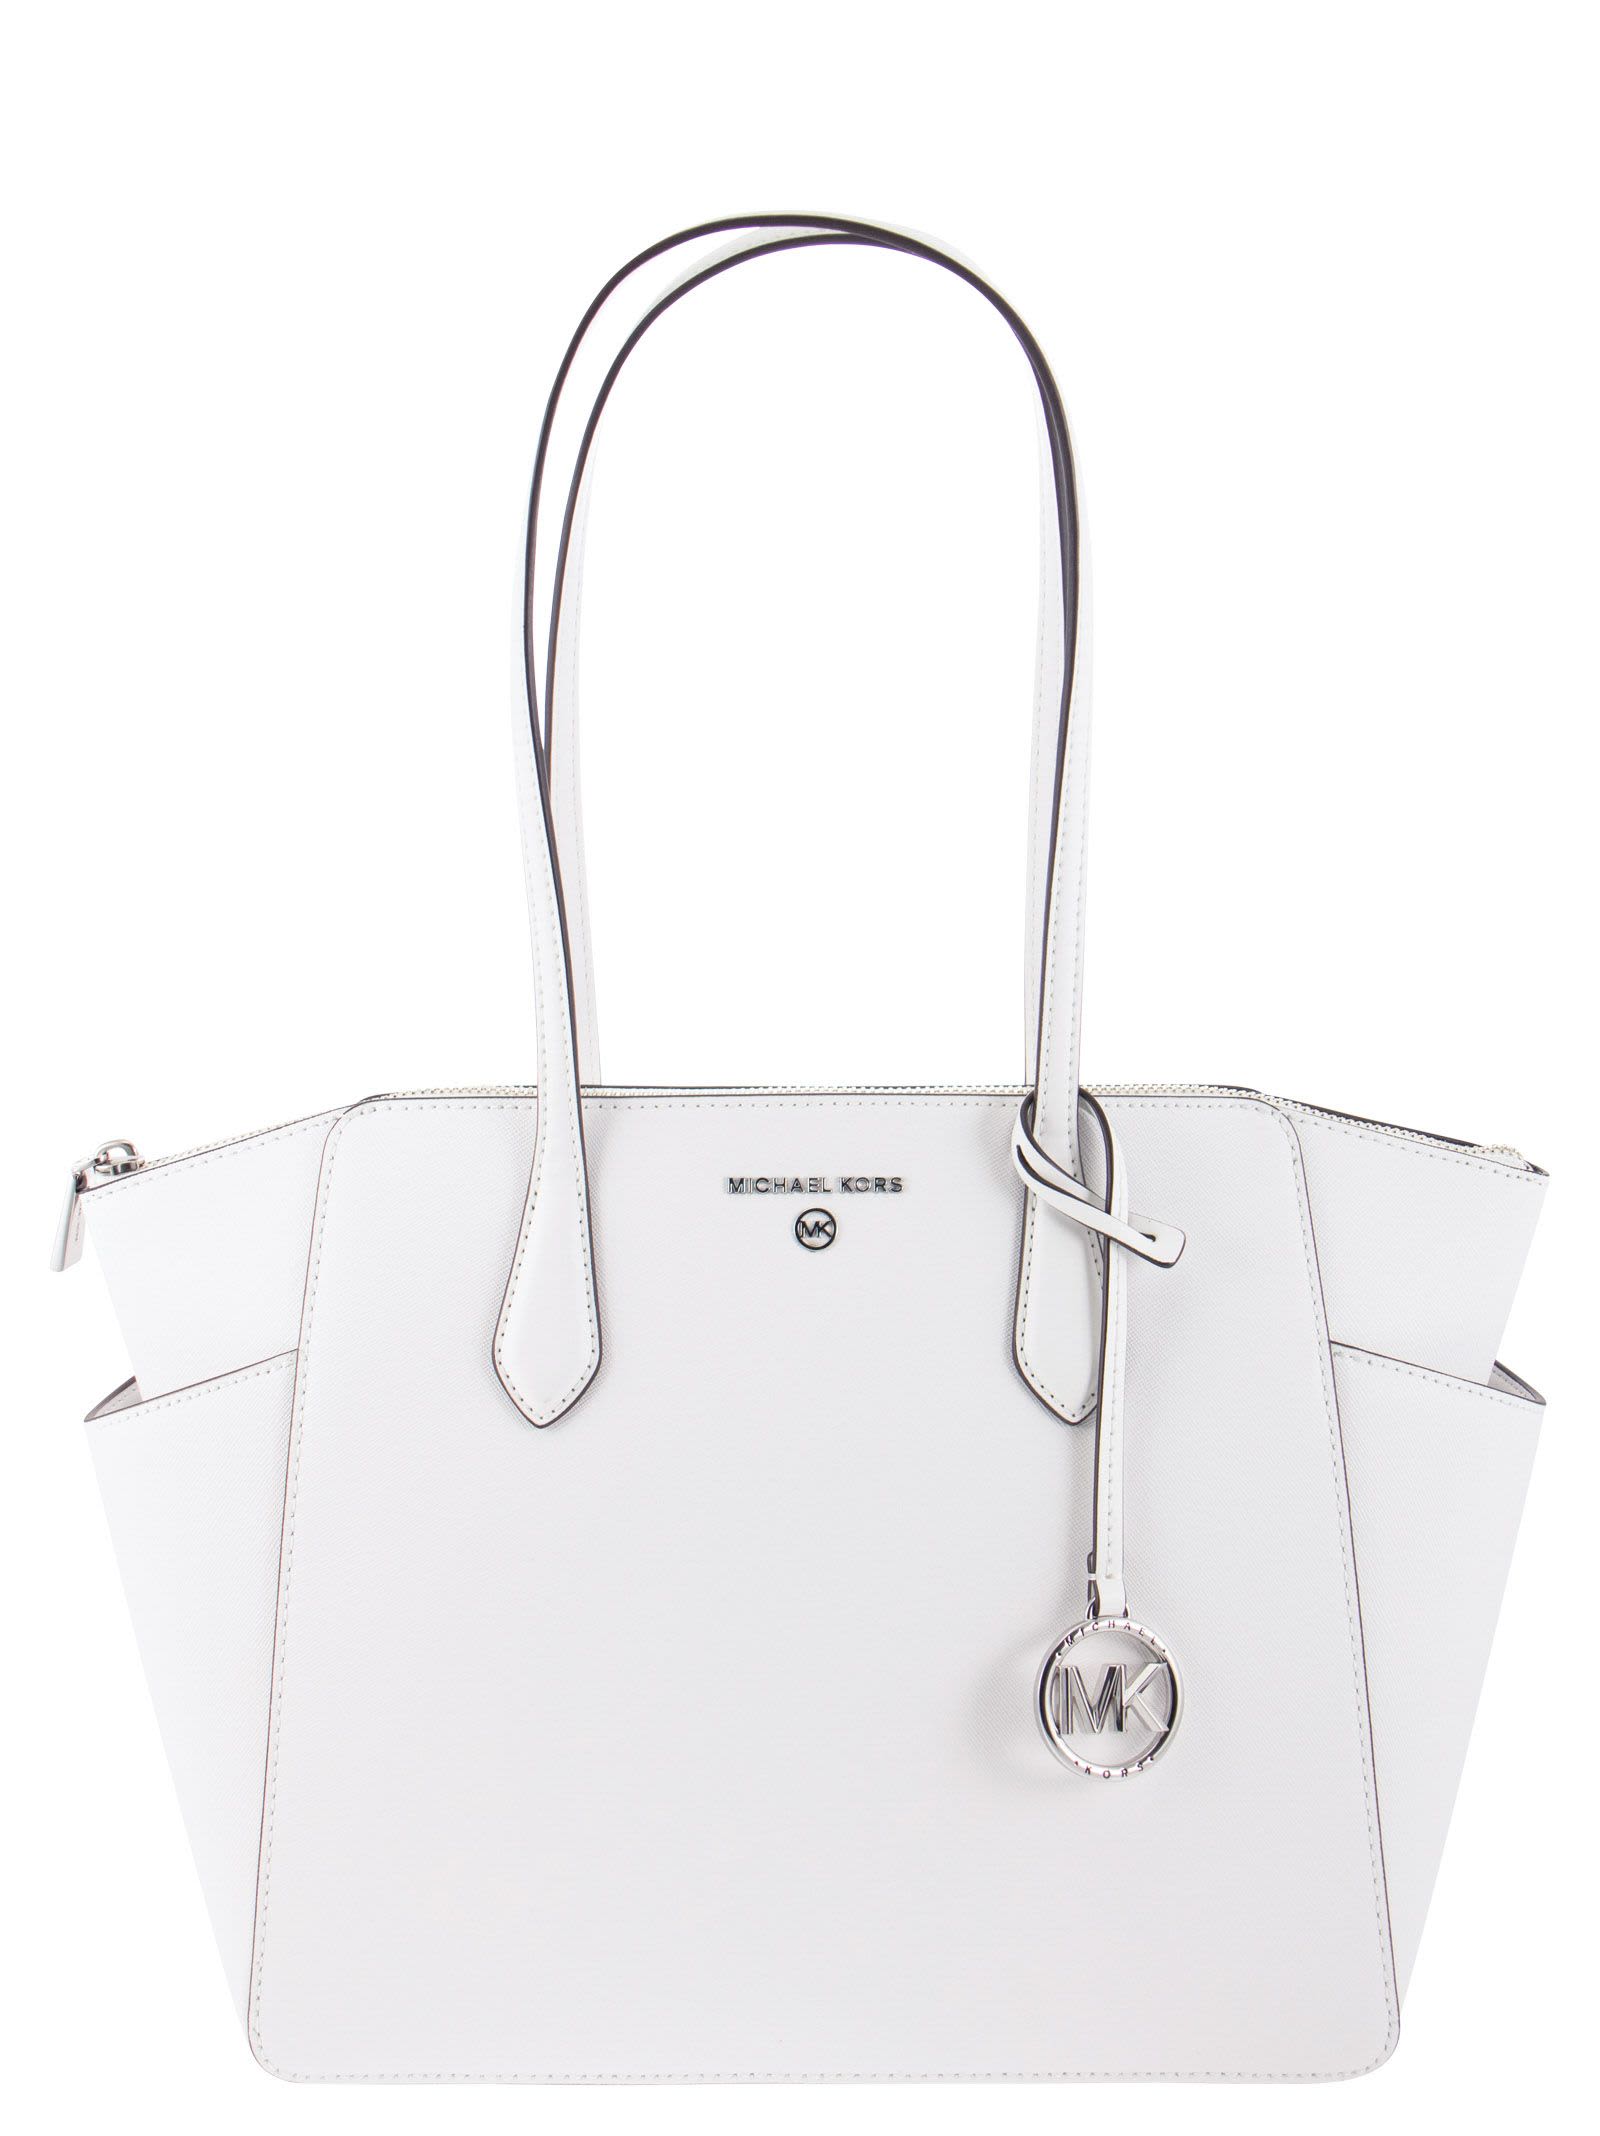 Michael Kors Edith Large Open Leather Tote Bag Optic White